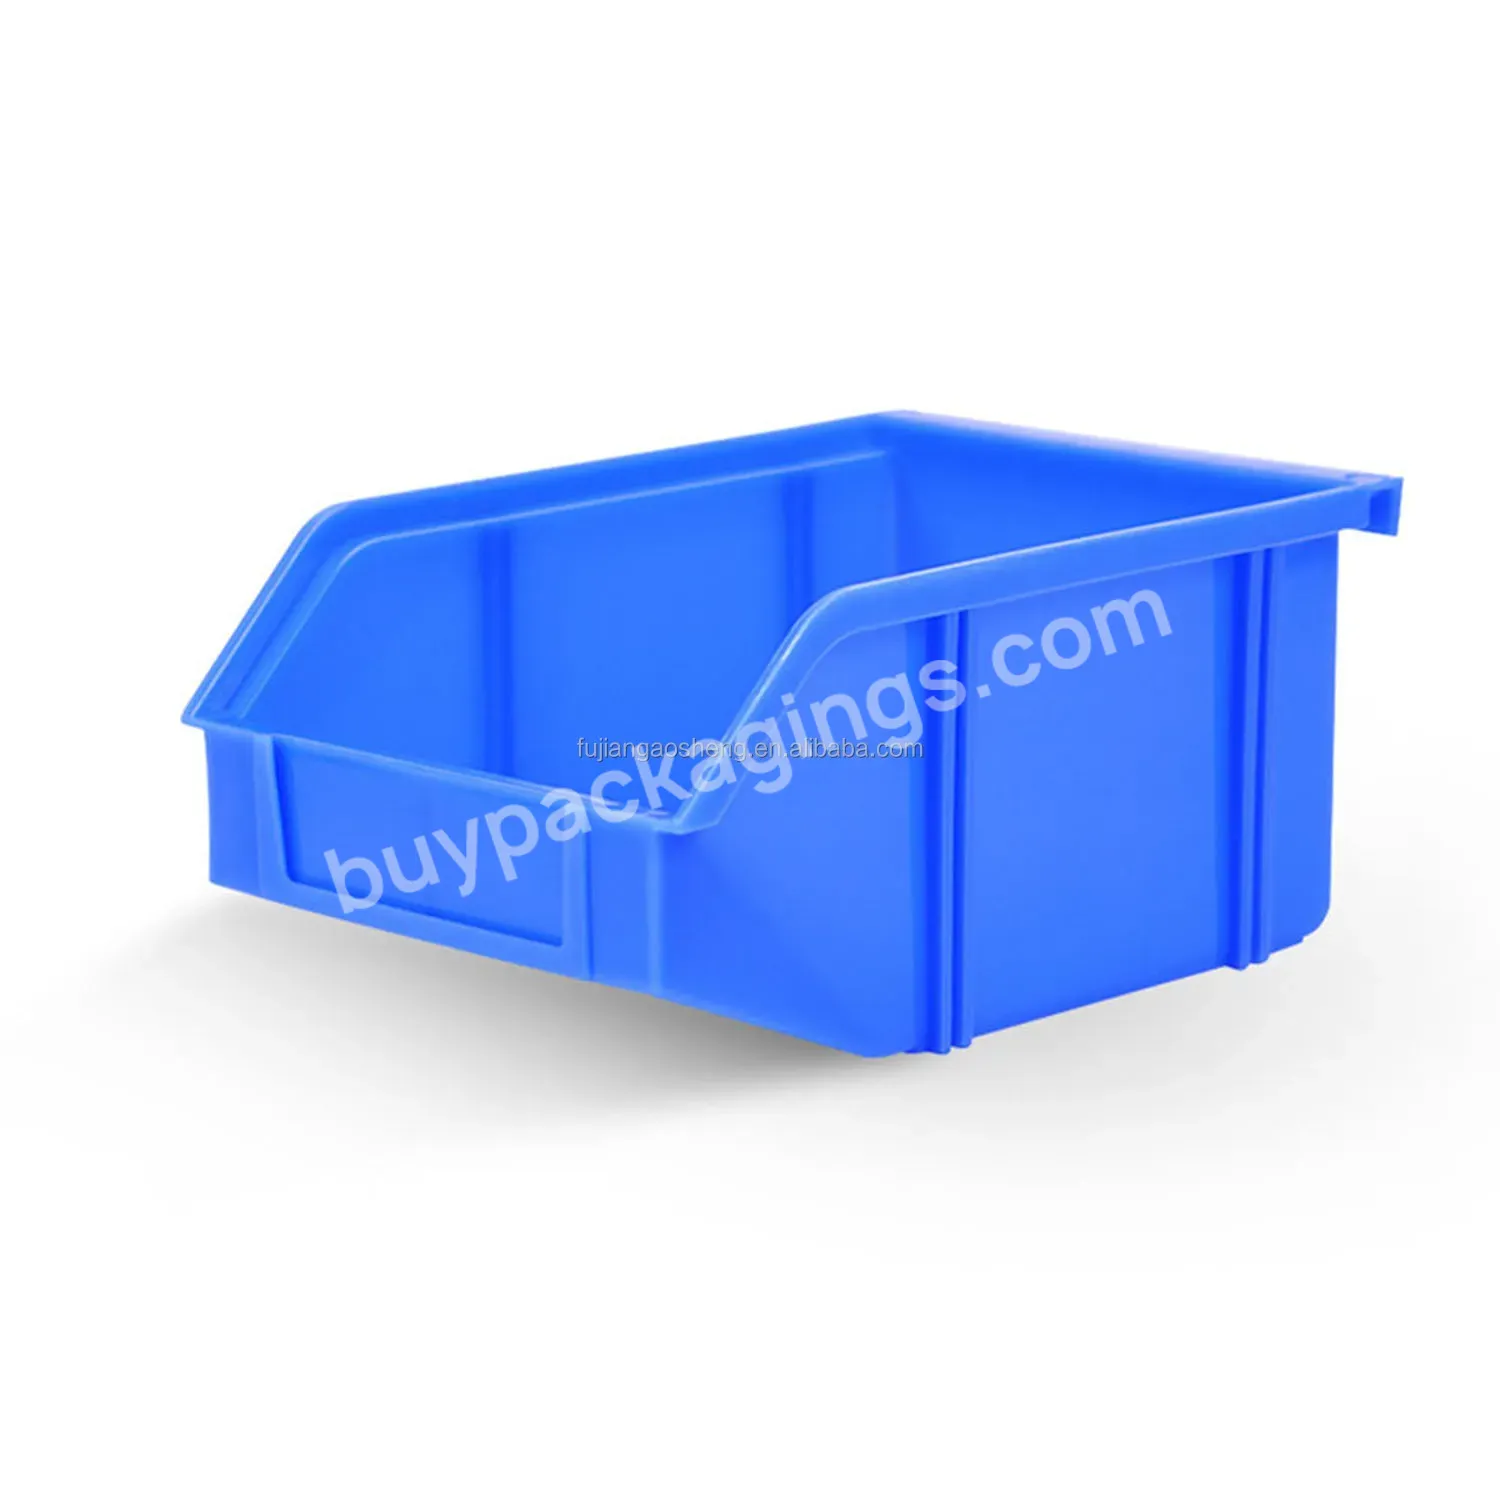 Cheap Price Shelf Bins For Industrial Plastic Portable Boxes Plastic Stackable And Hanging Divisible Storage Shelf Bins - Buy Plastic Storage Bins Suspended Bevel Box,Cheap Plastic Storage Bins,Stackable Bread Bin.